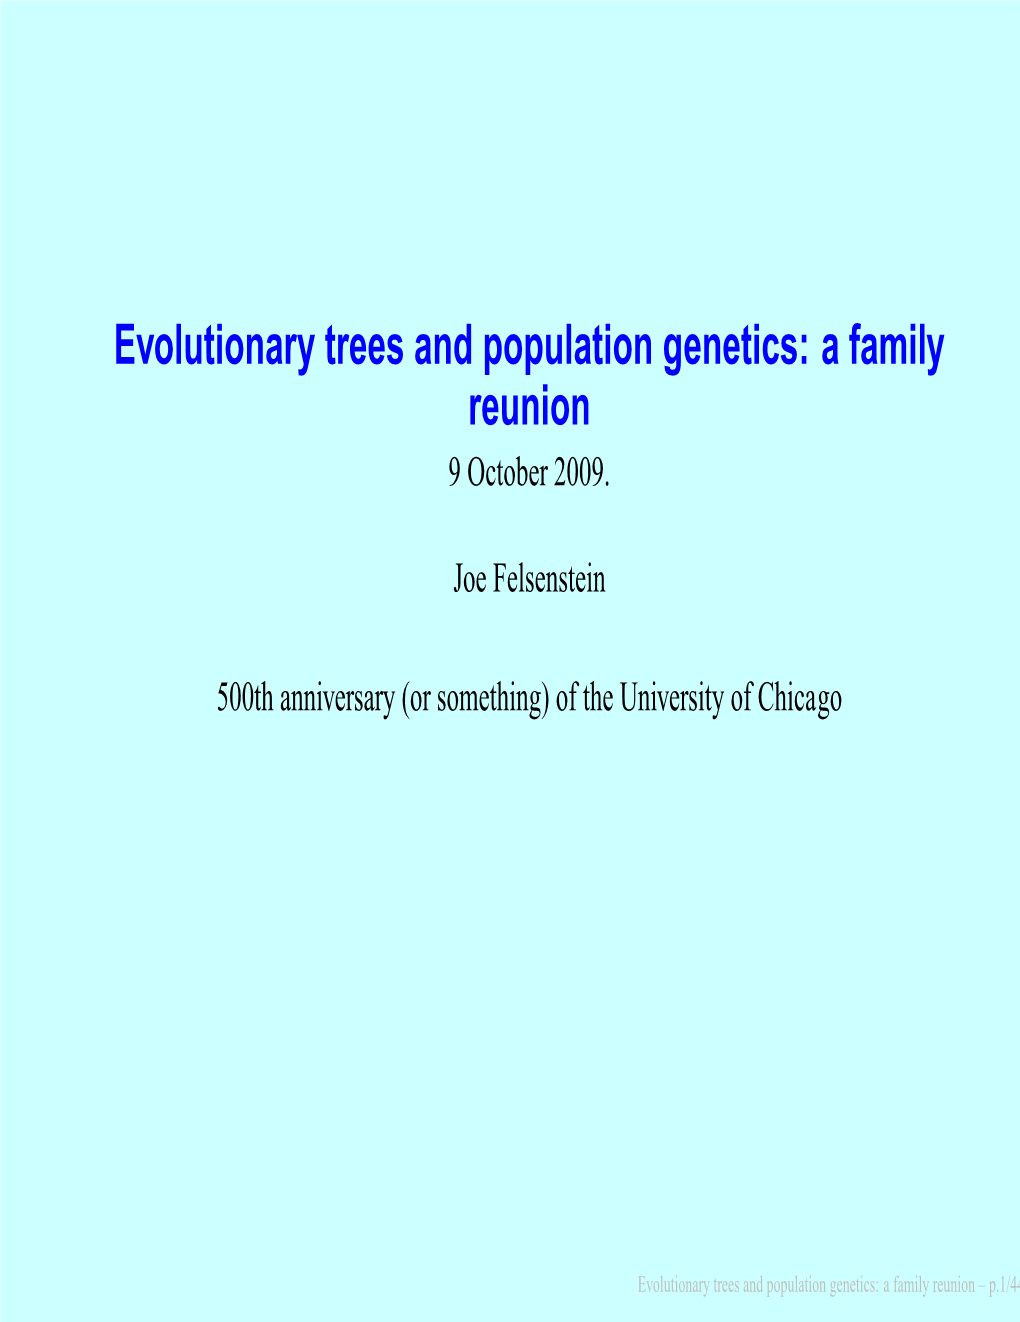 Evolutionary Trees and Population Genetics: a Family Reunion 9 October 2009